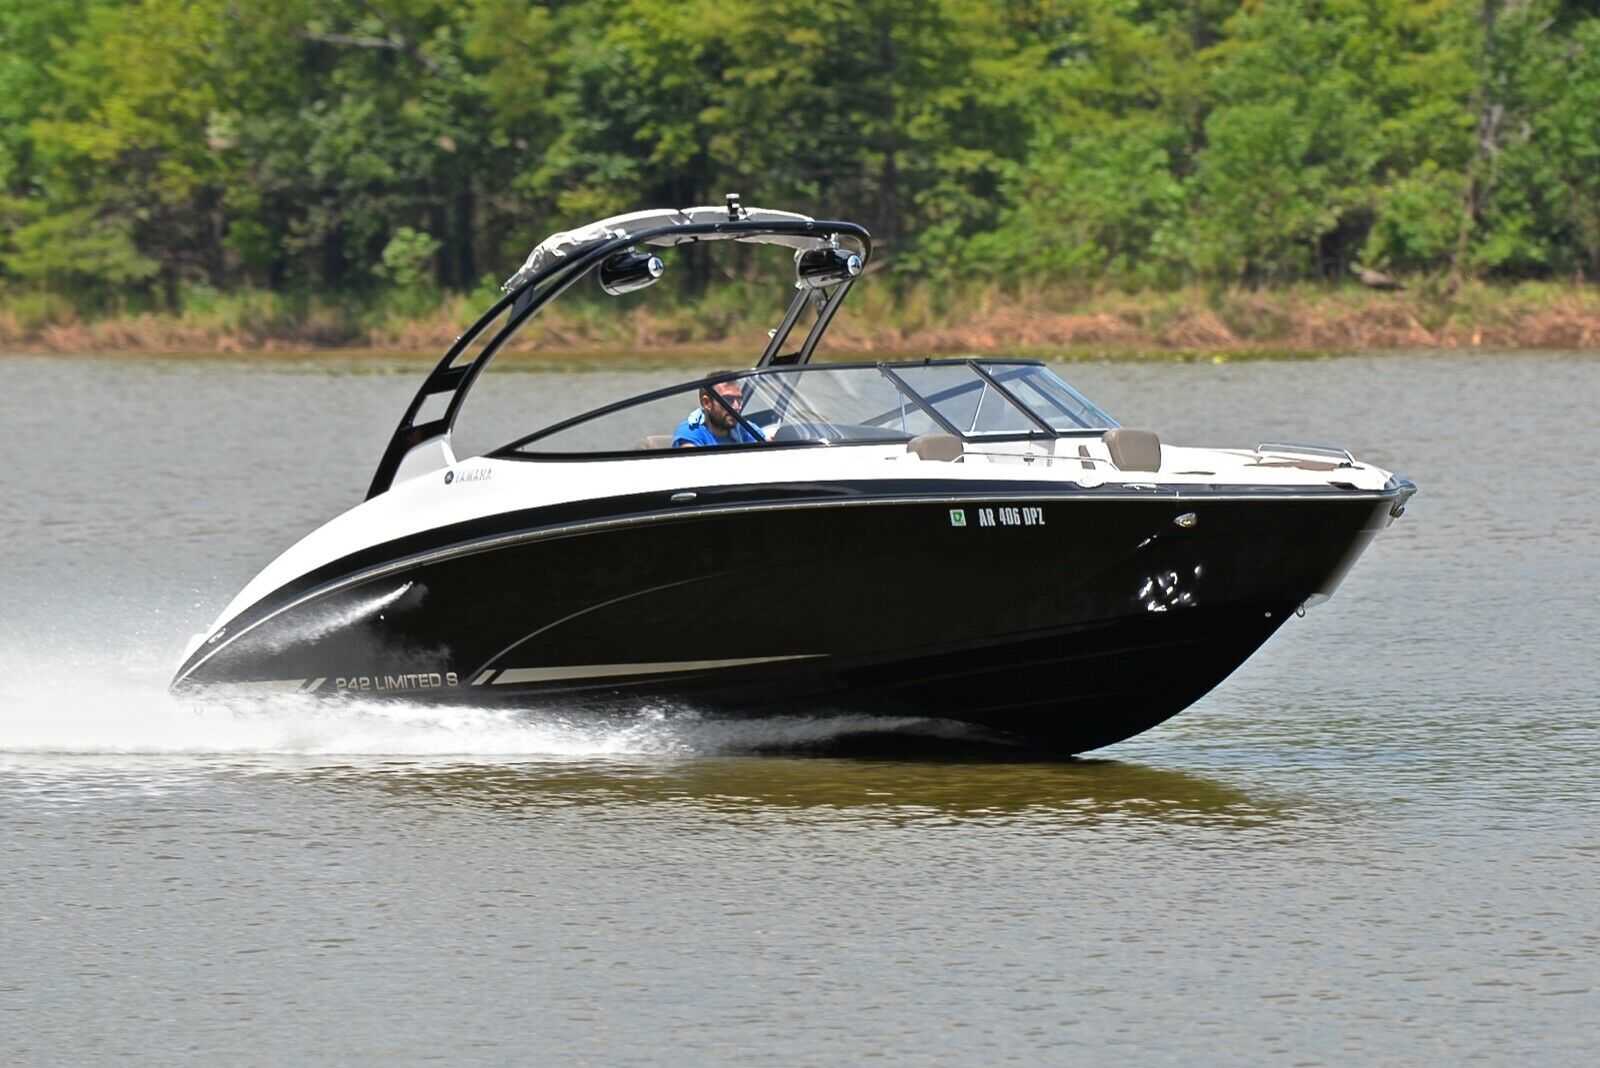 Yamaha 242 S Limited Boat For Sale Page 32 Waa2